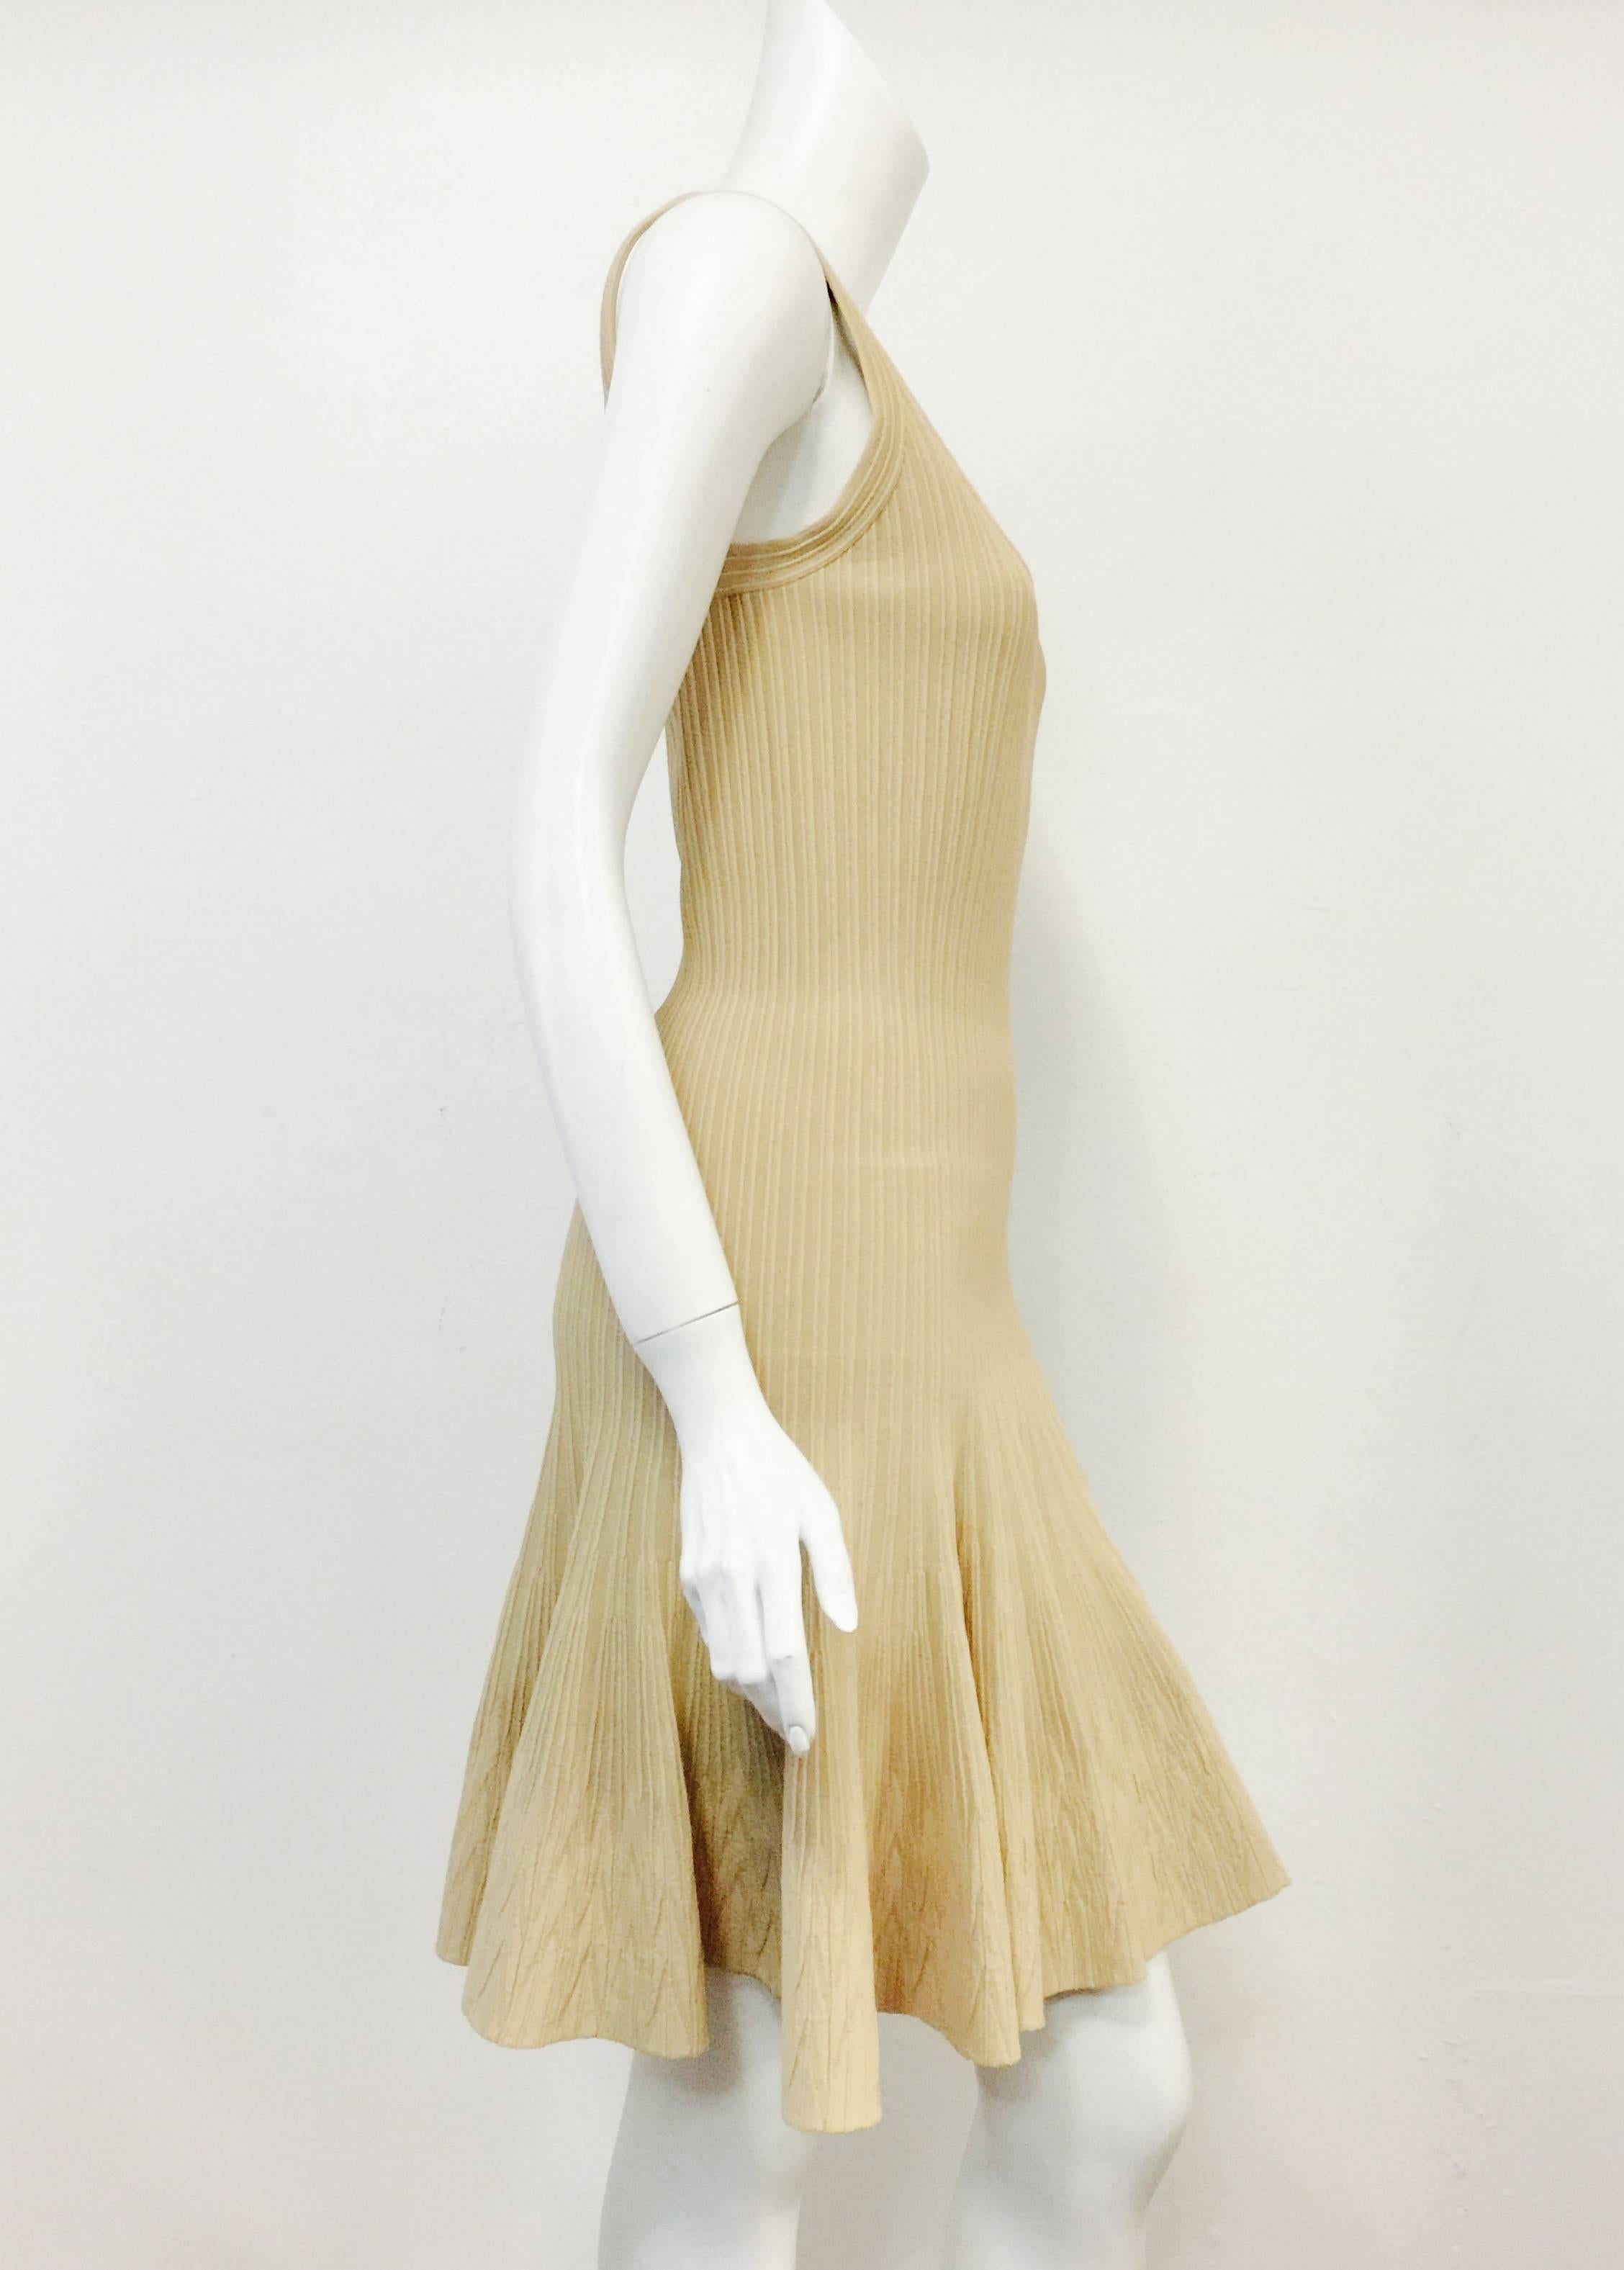 Butter Cream Sleeveless Stetch Dress illustrates why Azzedine Alaia is considered one of fashion's most influential designers of the past 50 years! Dress features the technologically-advanced, stretch, ribbed material that Azzedine has called his